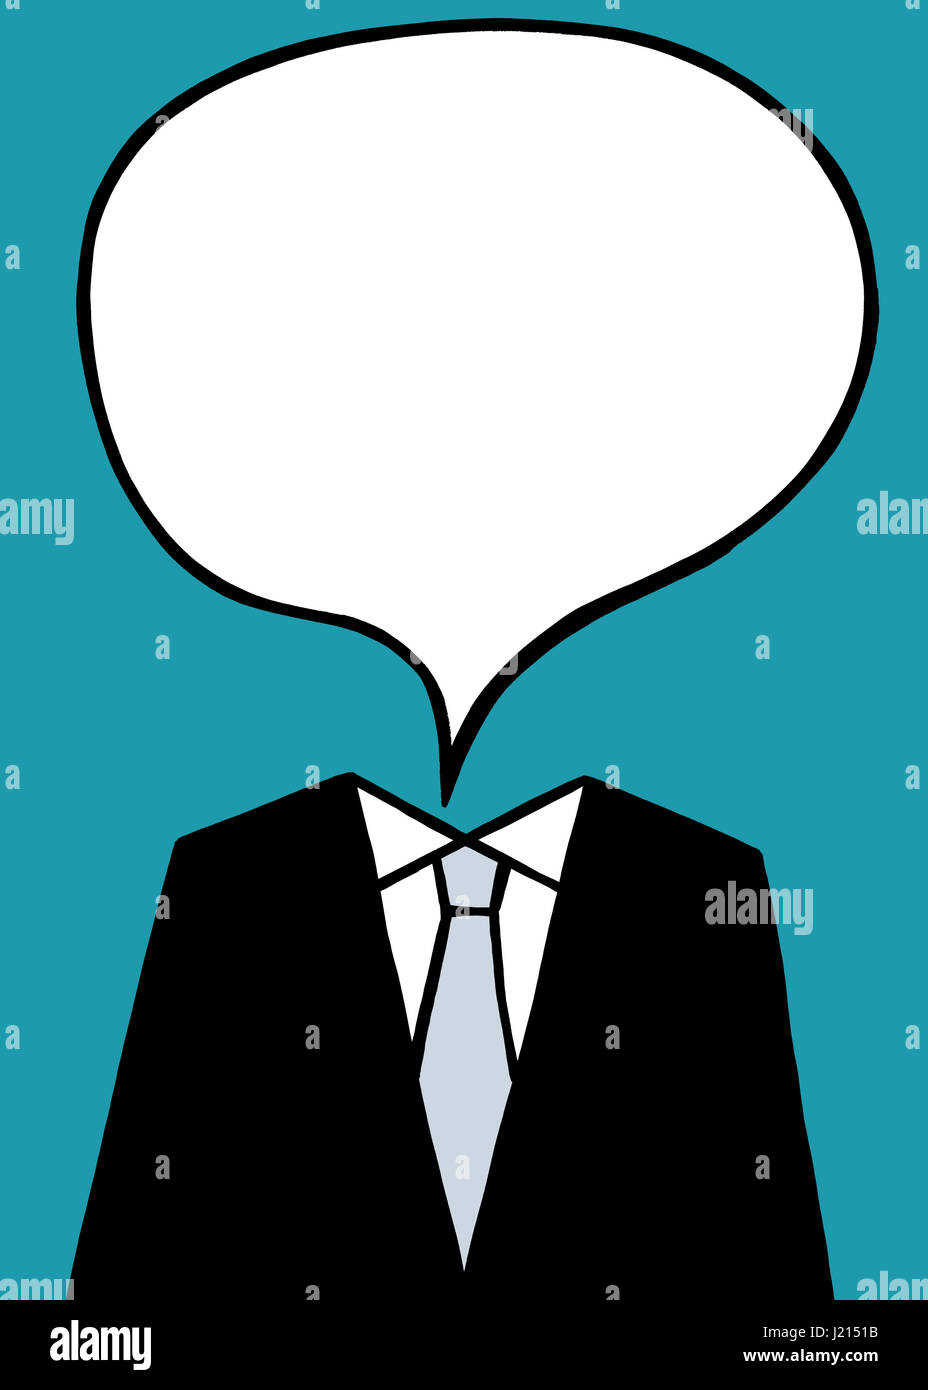 You say. A business illustration about thinking different thoughts. Stock Photo